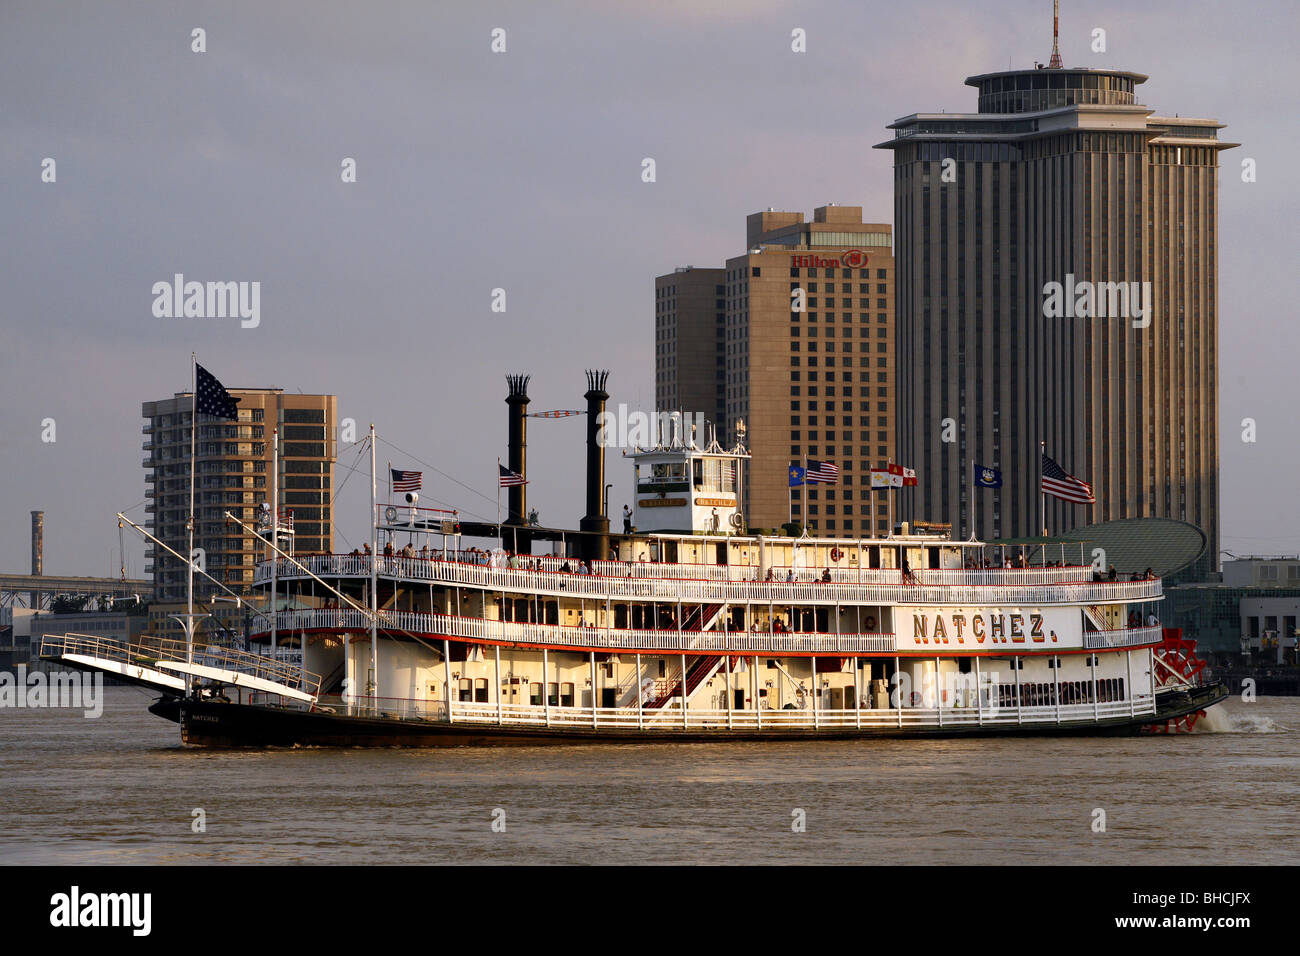 Natchez Paddle Steamer with Hilton Hotel & World Trade Center in background, New Orleans, Louisiana, USA Stock Photo